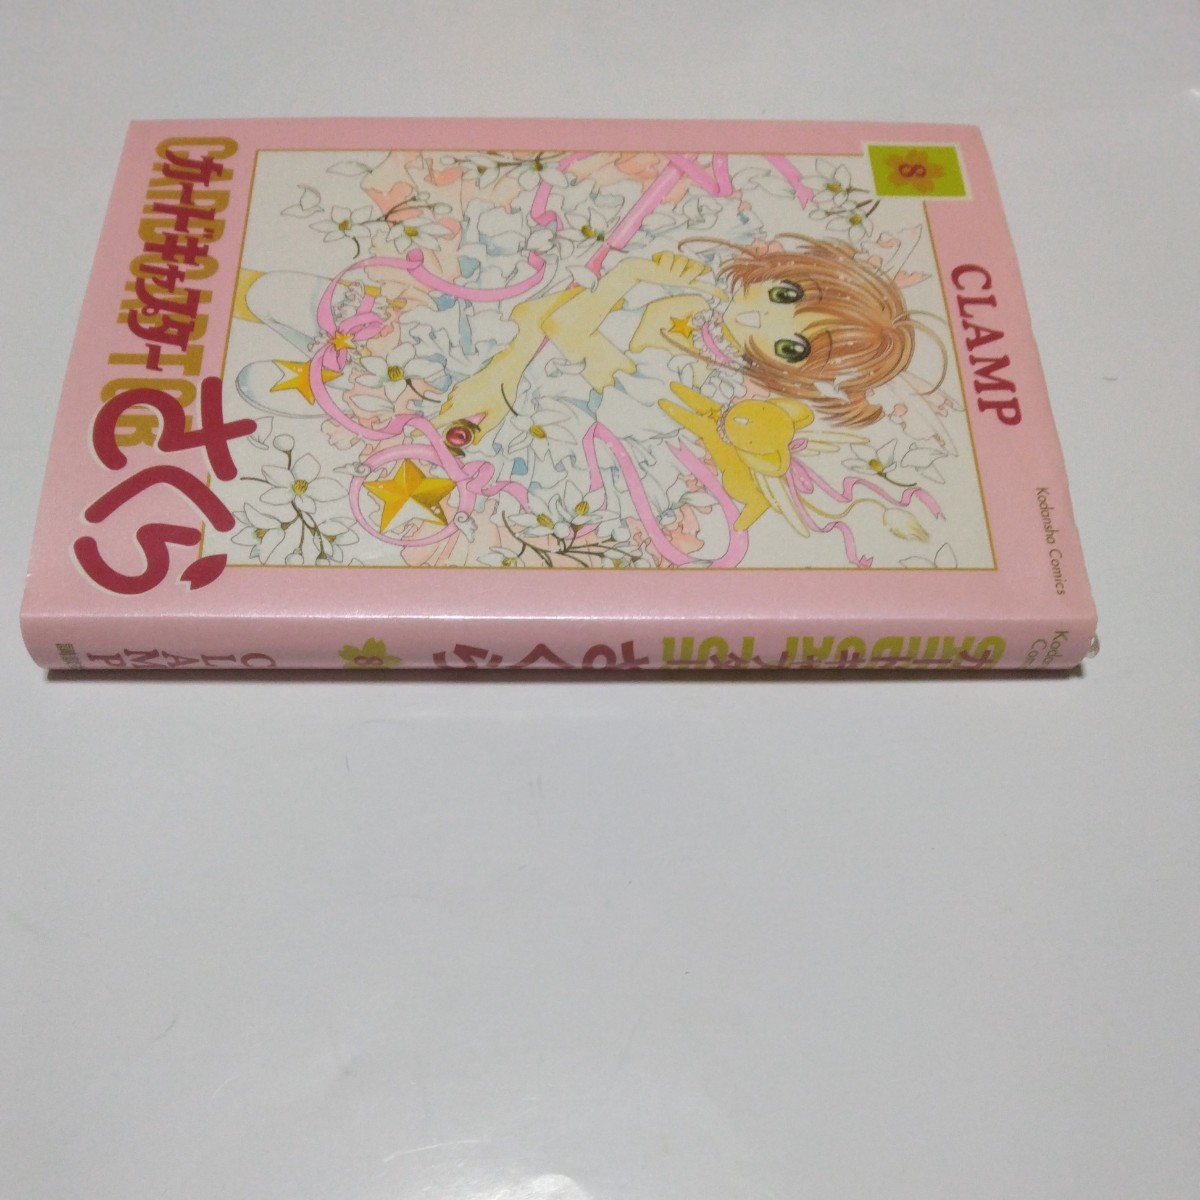  Cardcaptor Sakura new equipment version 8 volume ( repeated version )CLAMP.. company at that time goods storage goods 